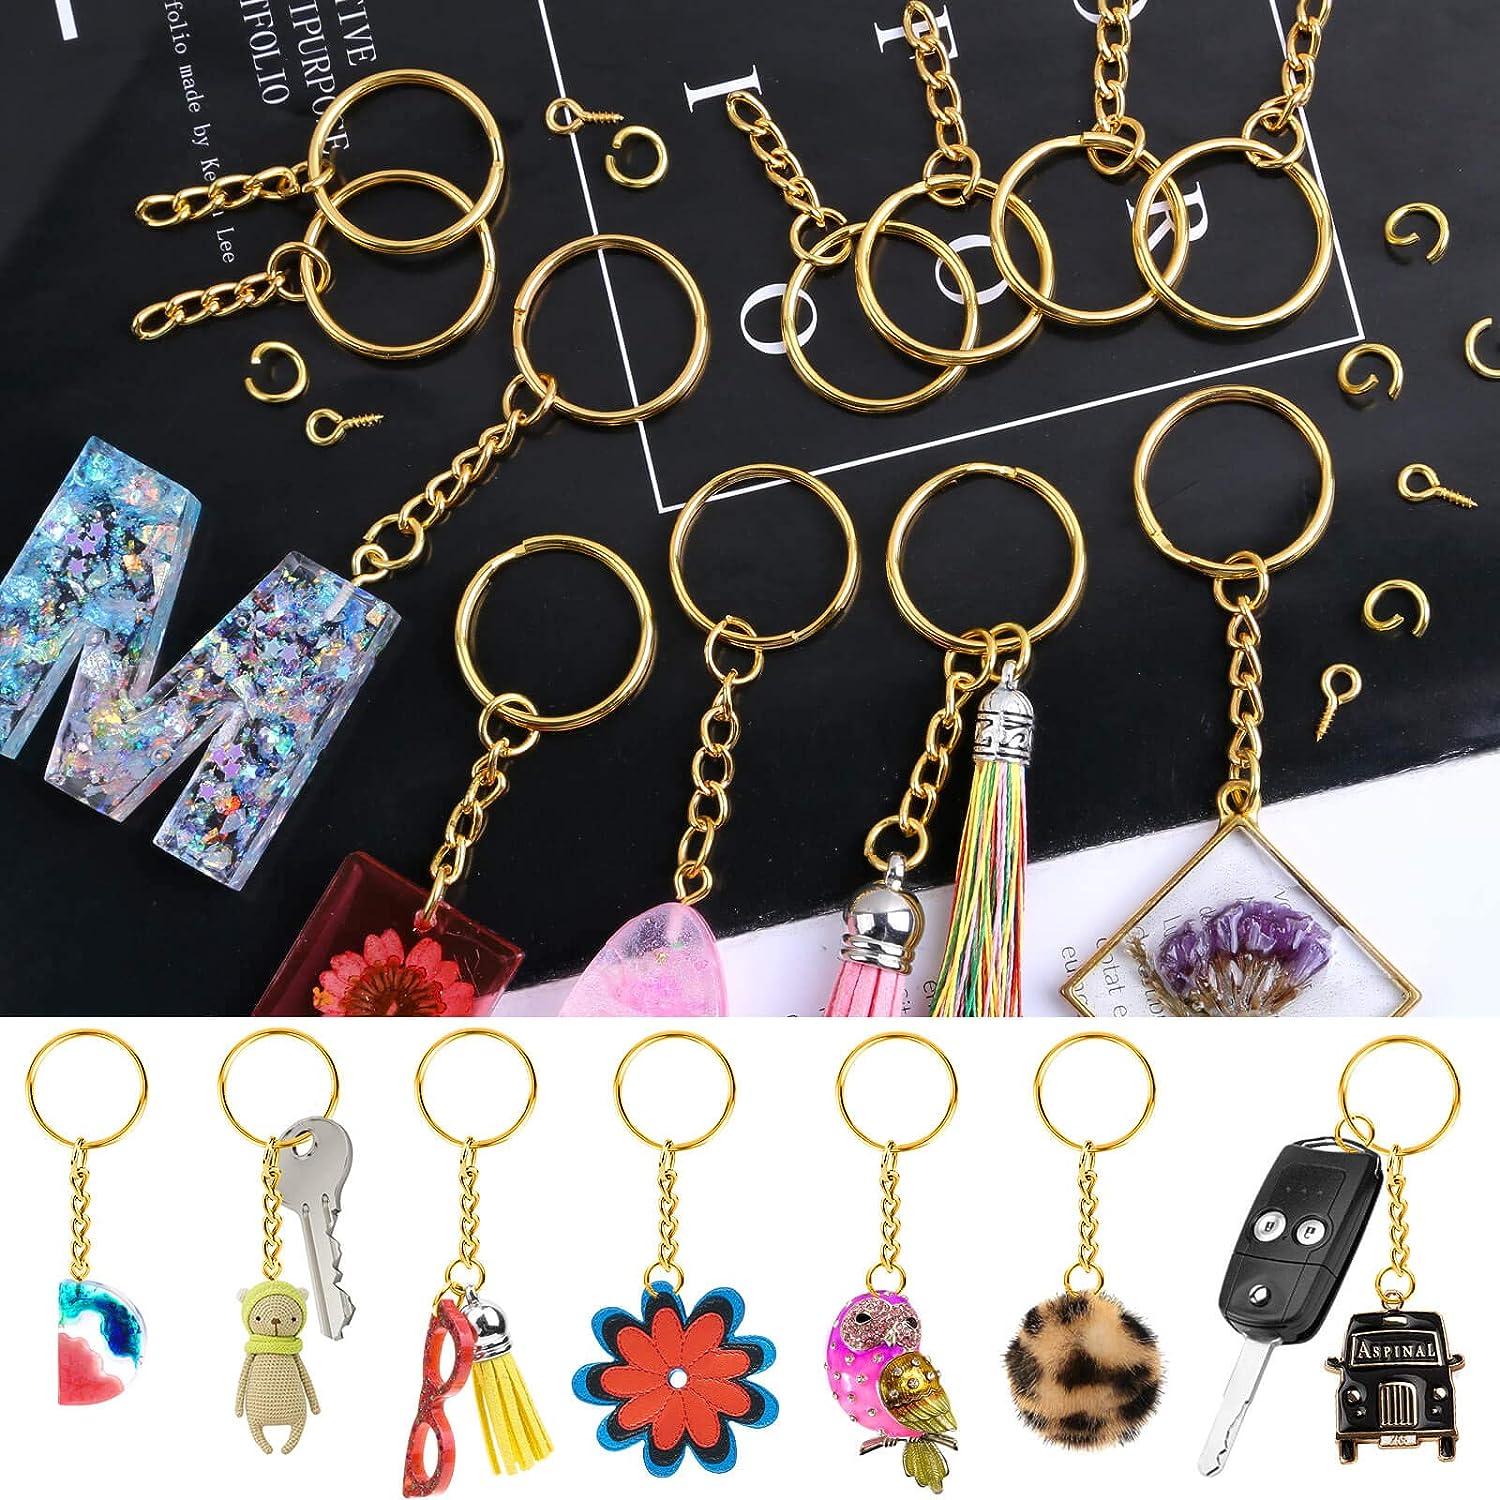 Paxcoo 200pcs Split Key Rings Bulk for Keychain and Crafts (25mm)